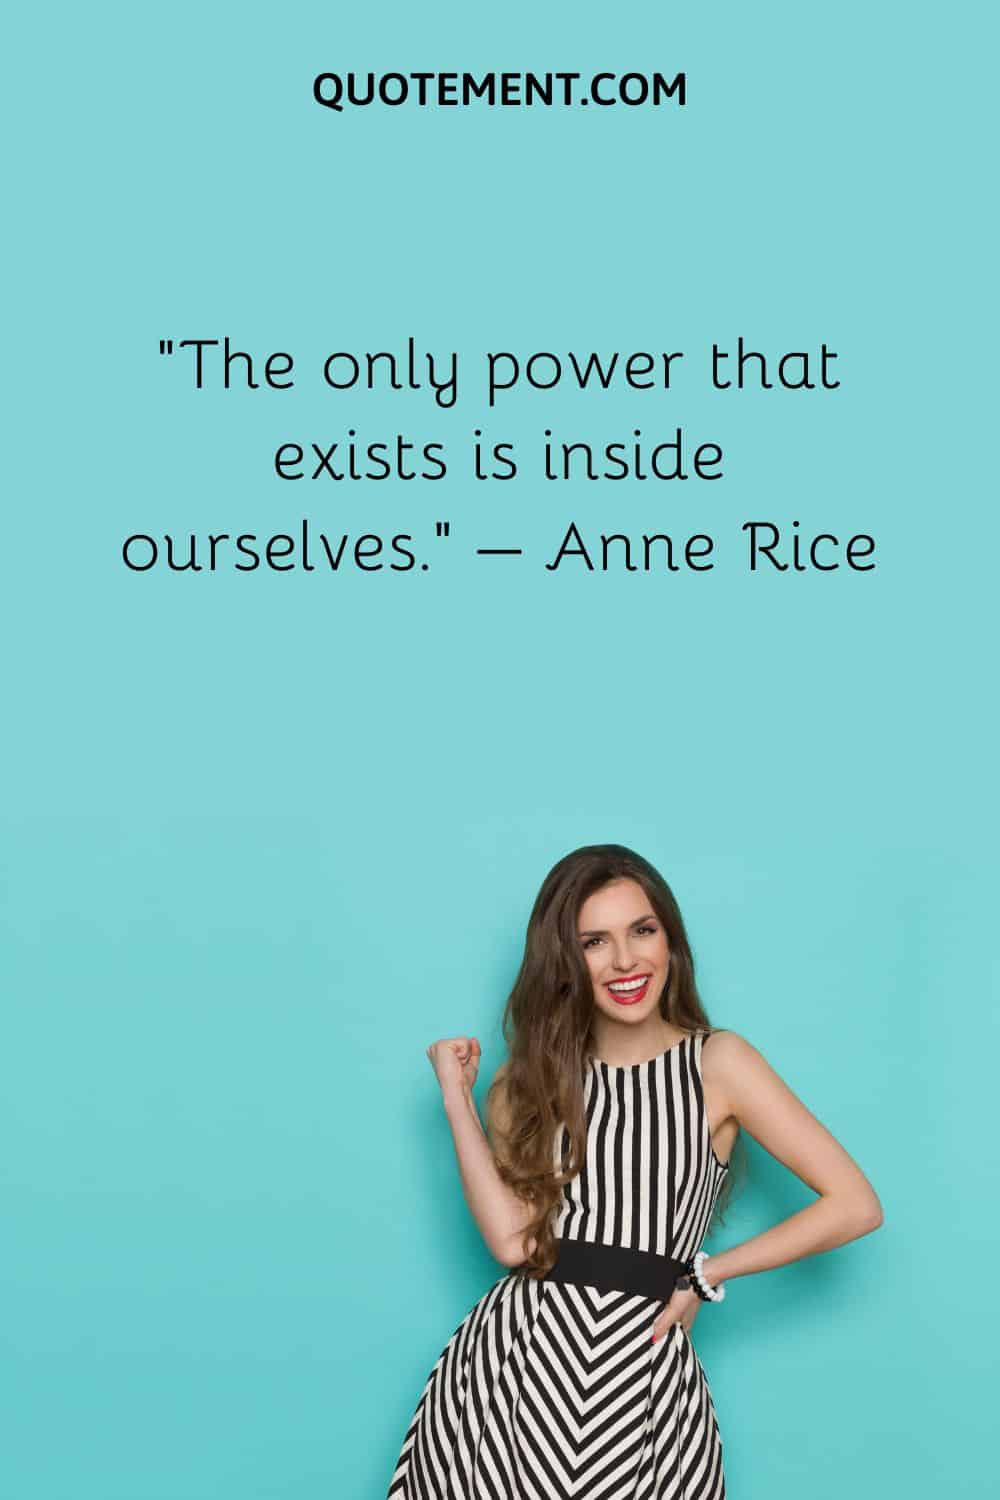 The only power that exists is inside ourselves